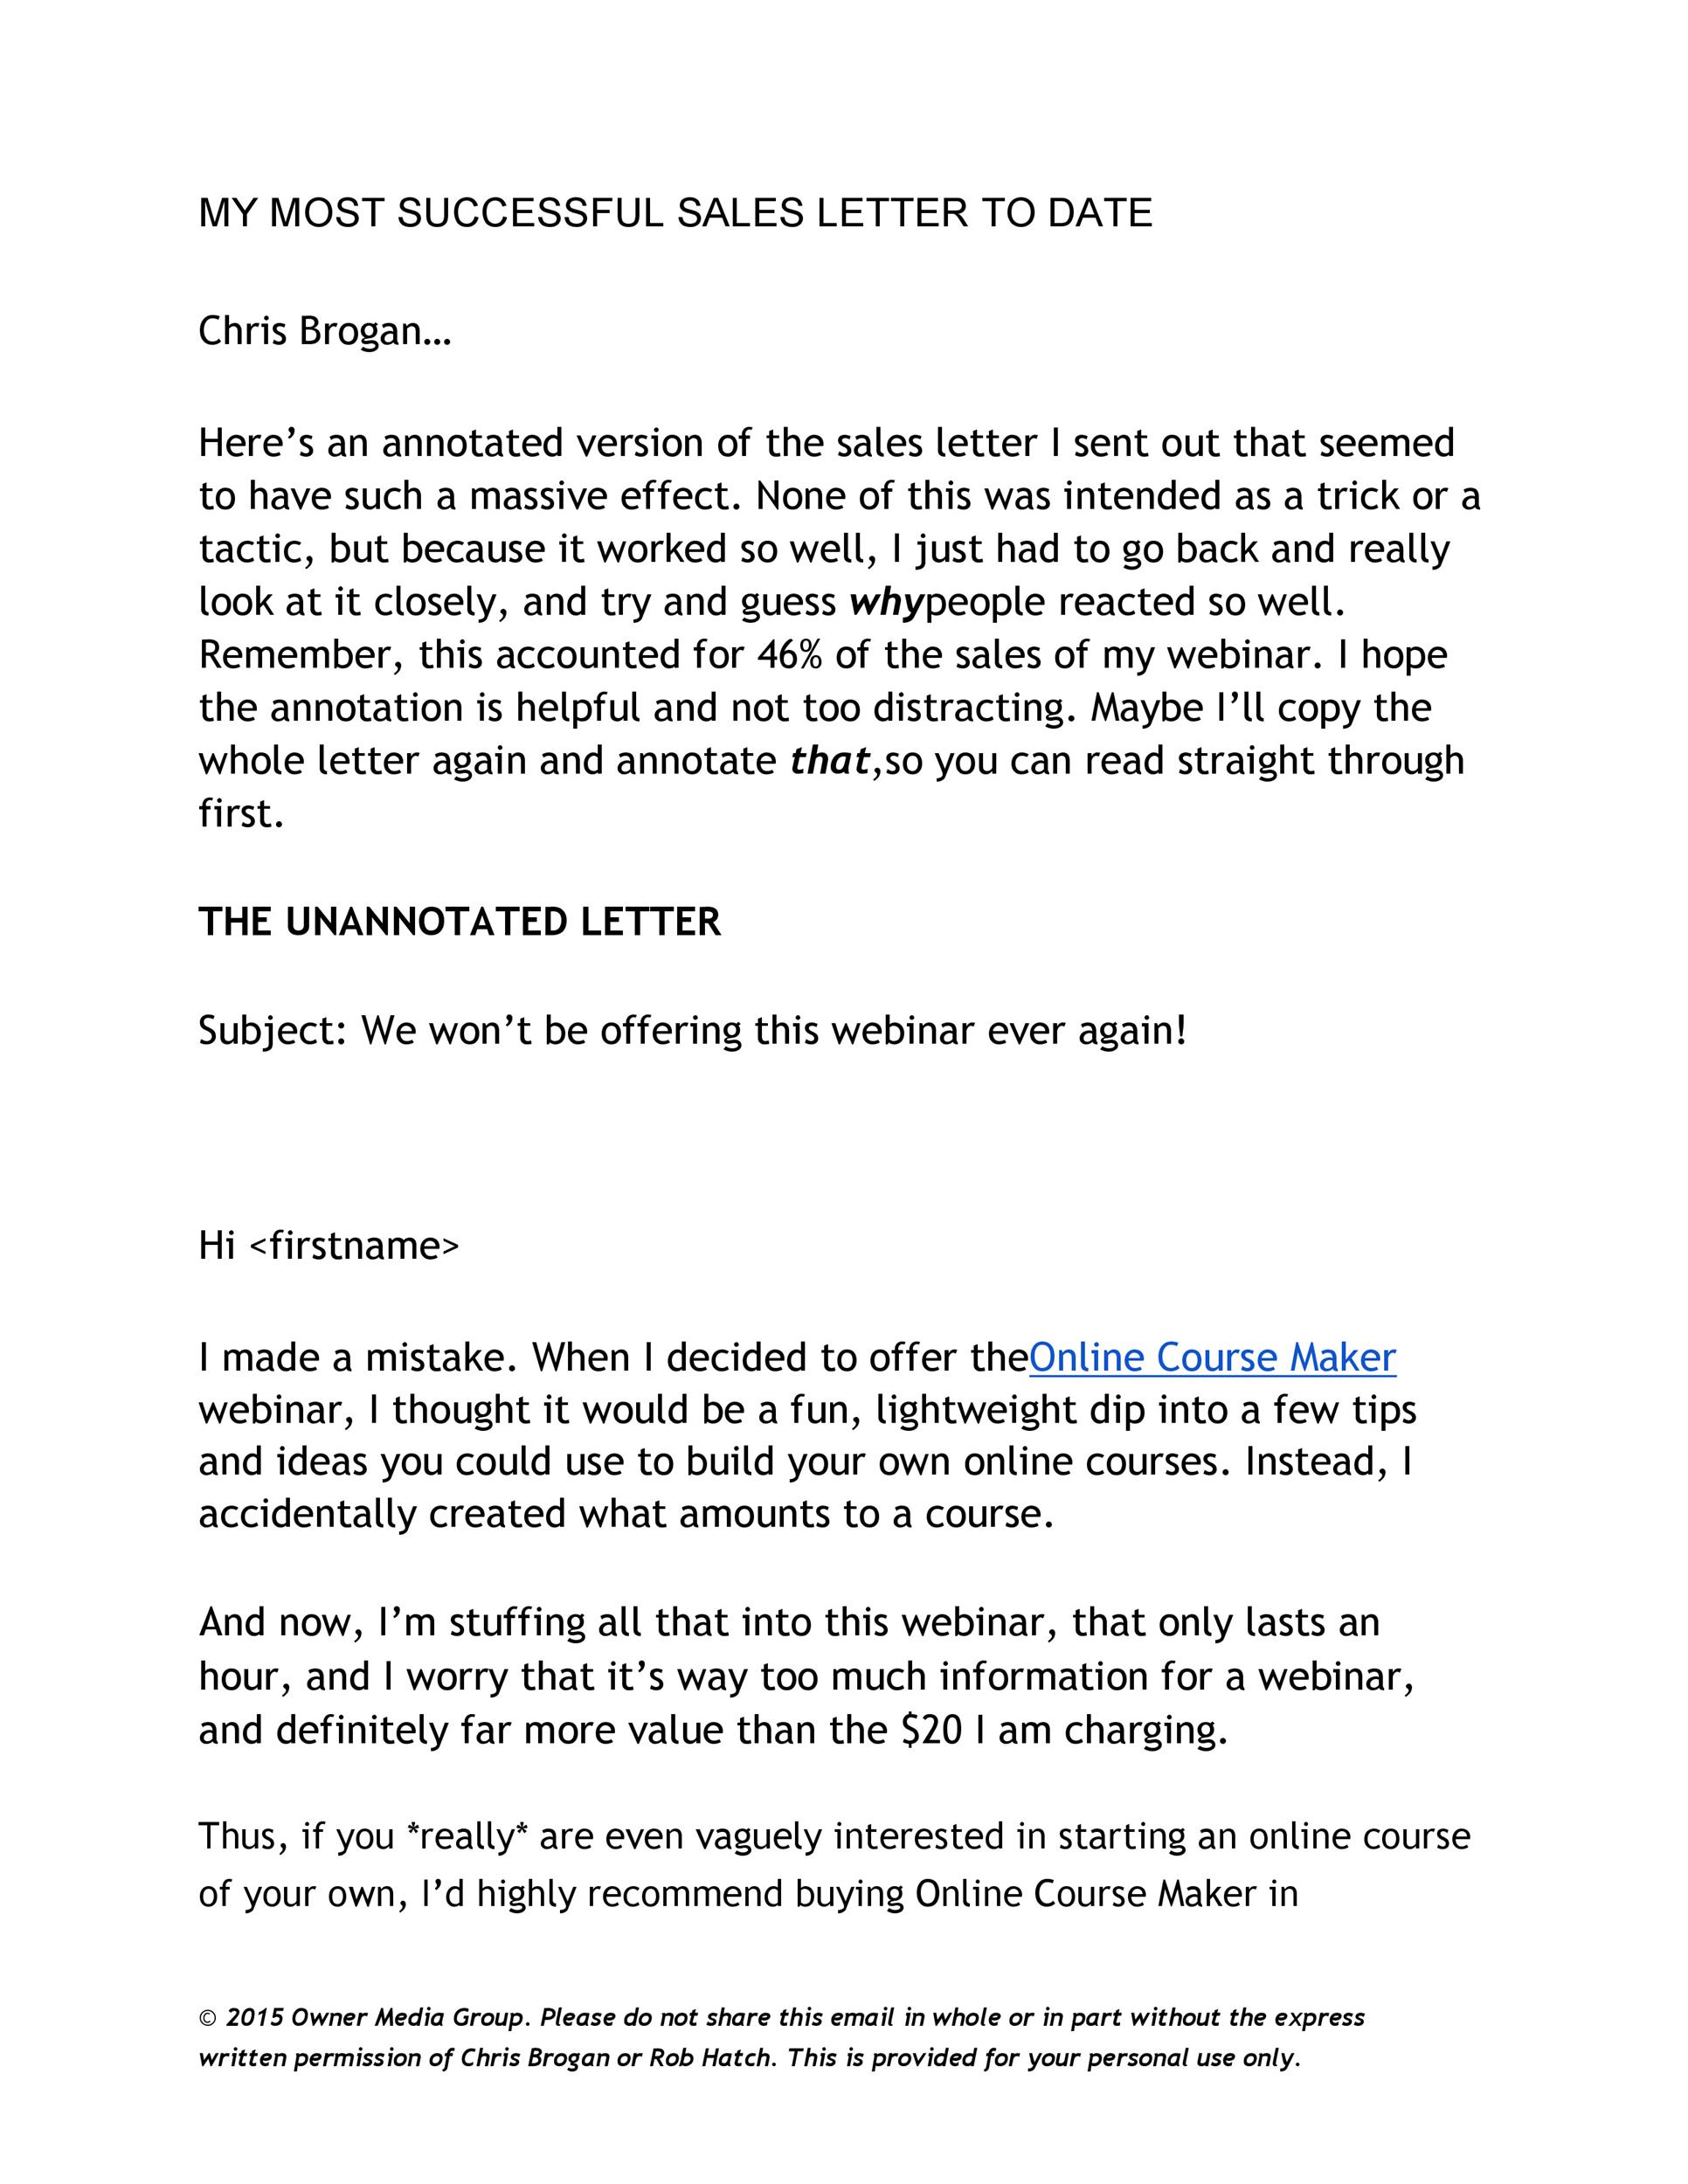 Free sales letter template 43